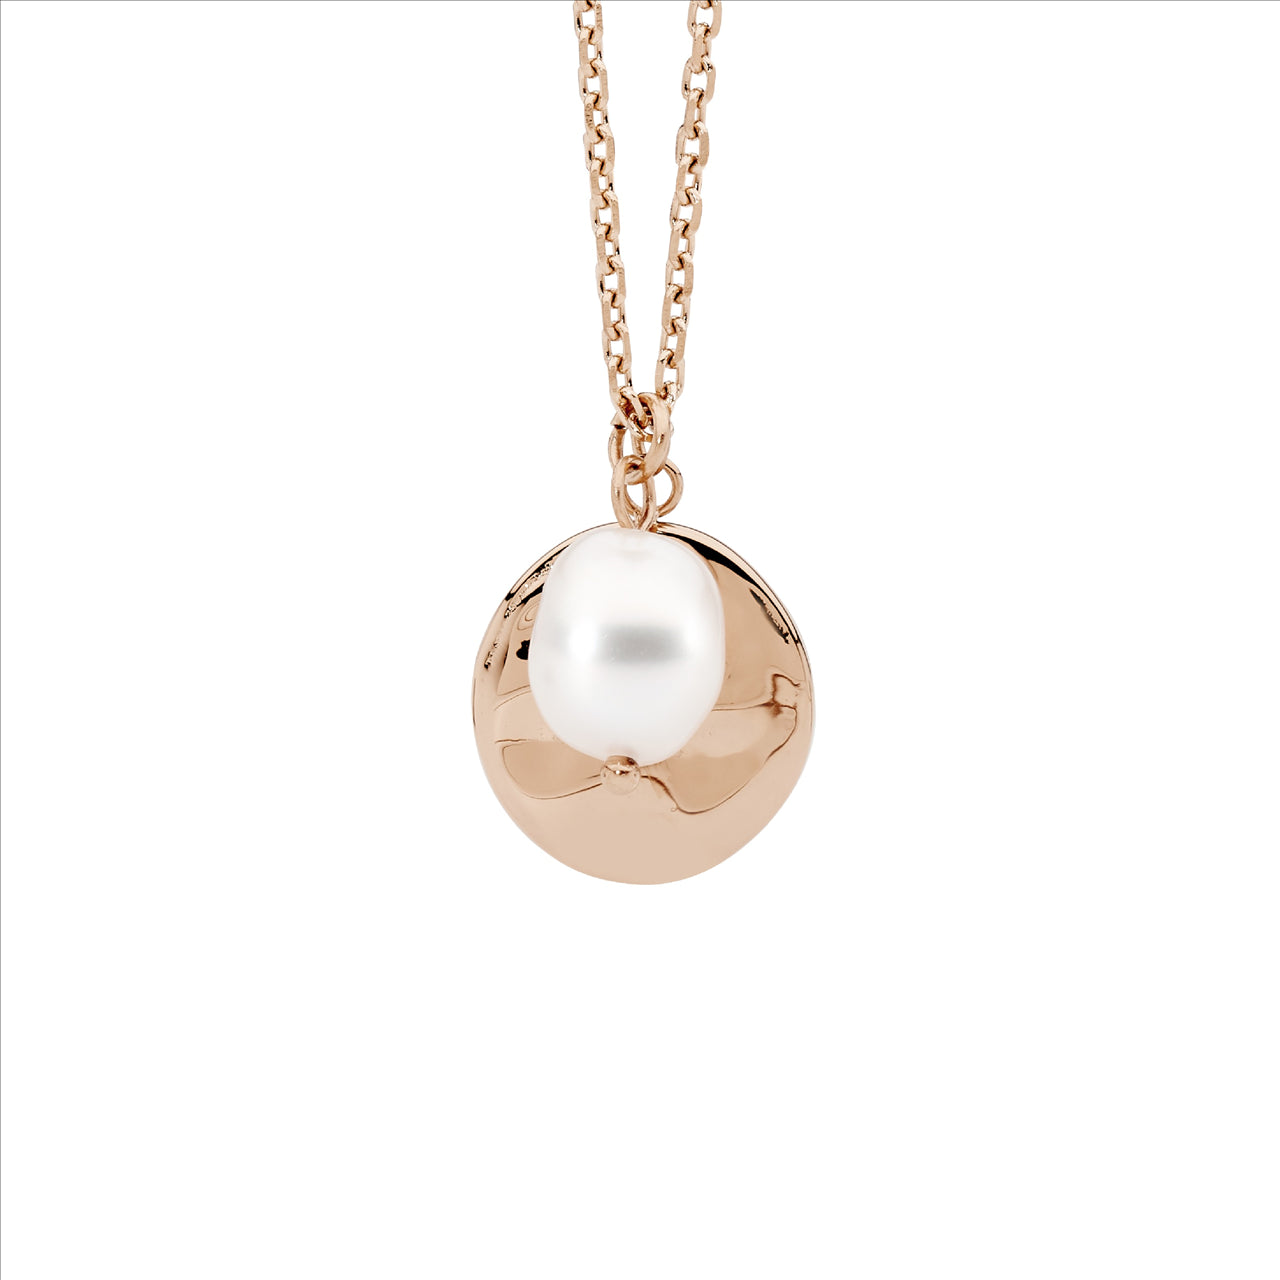 Rose Gold Plated Stainless Steel Disk w/ Freshwater Pear Pendant